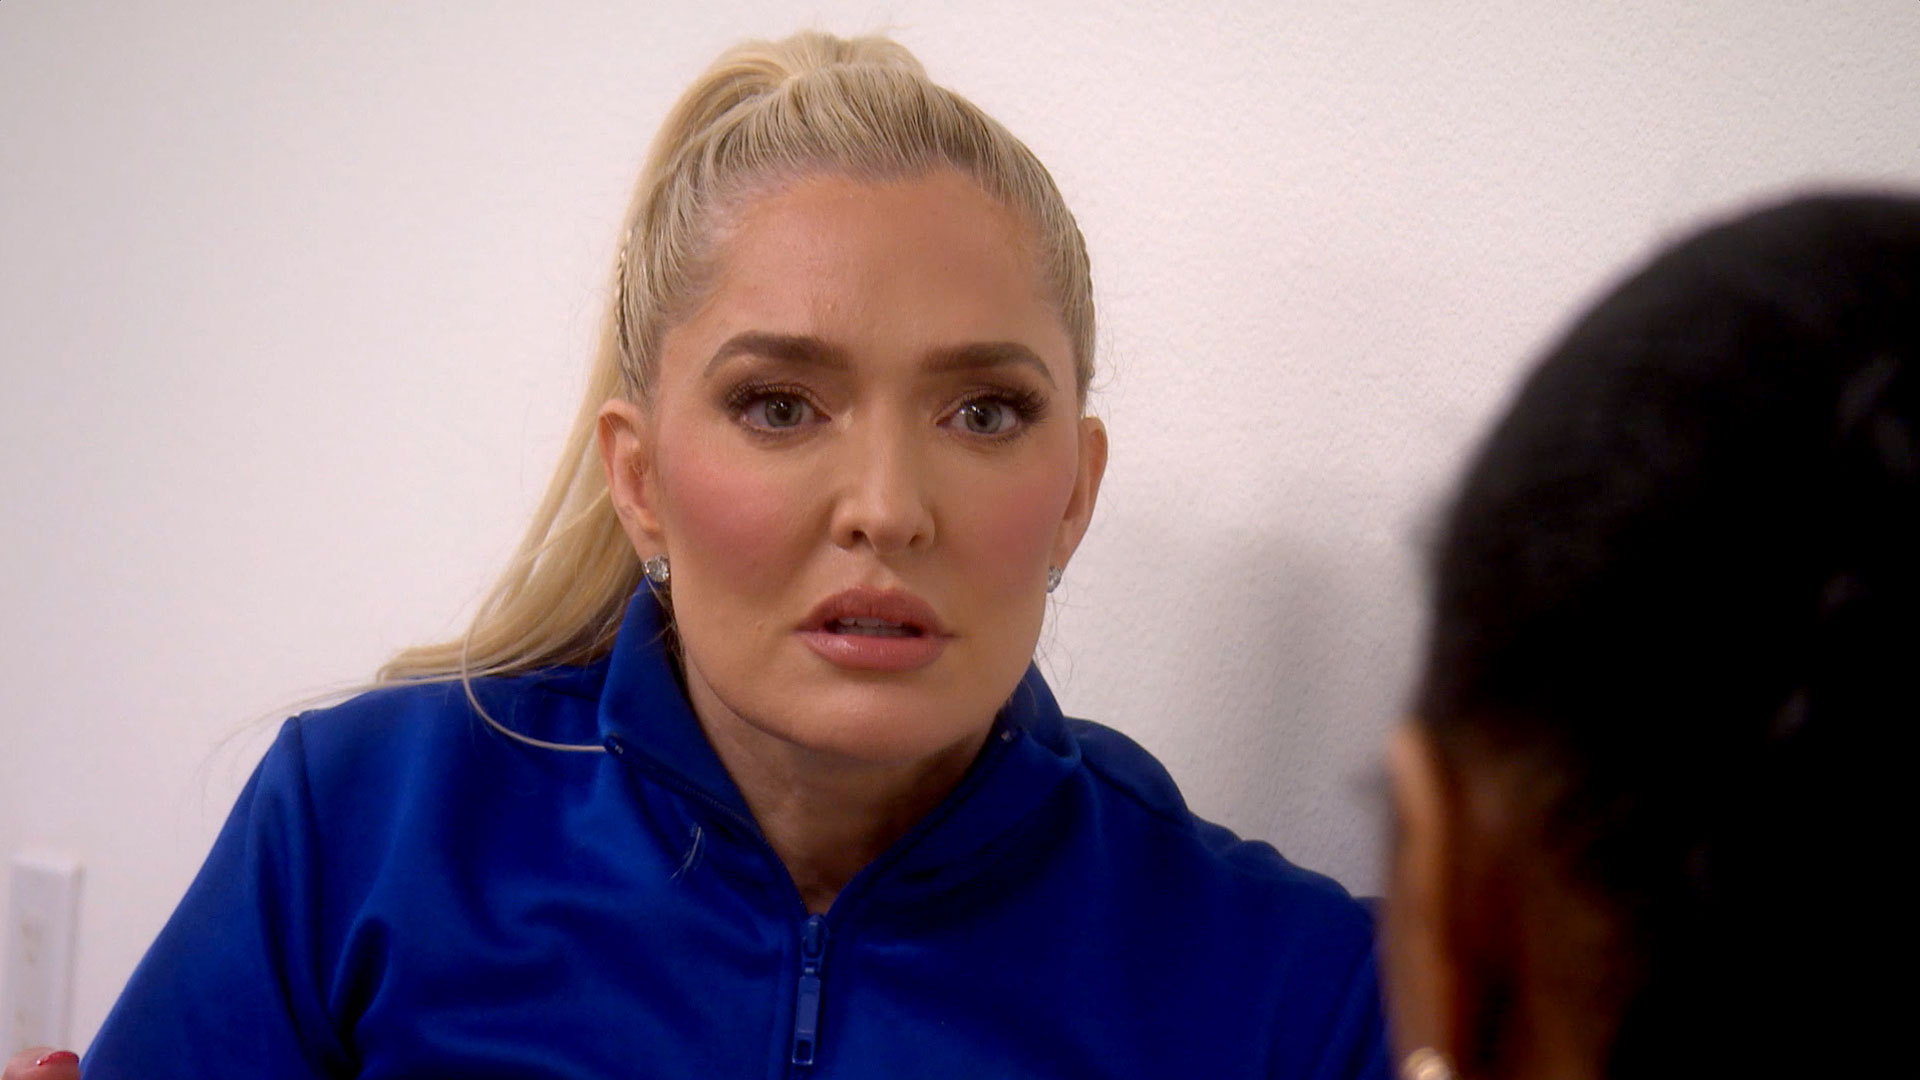 Erika Jayne Says Sutton Stracke Led the Charge on Things "That Have Been Disproven"